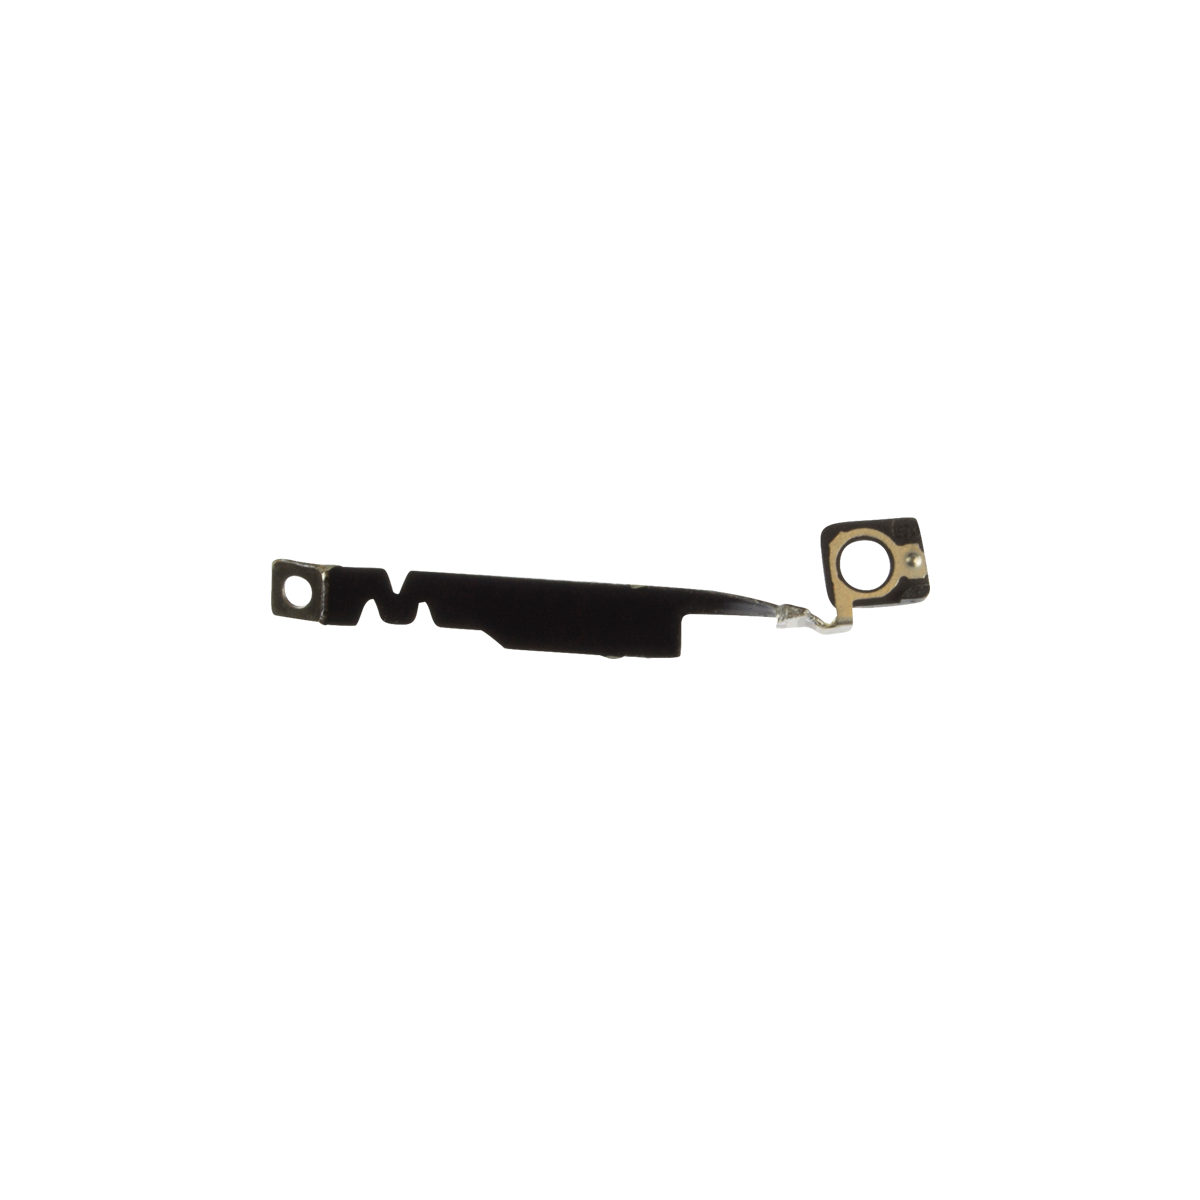 iPhone 7 Plus Wifi Antenna Flex Cable Replacement (Right of the Rear Camera)